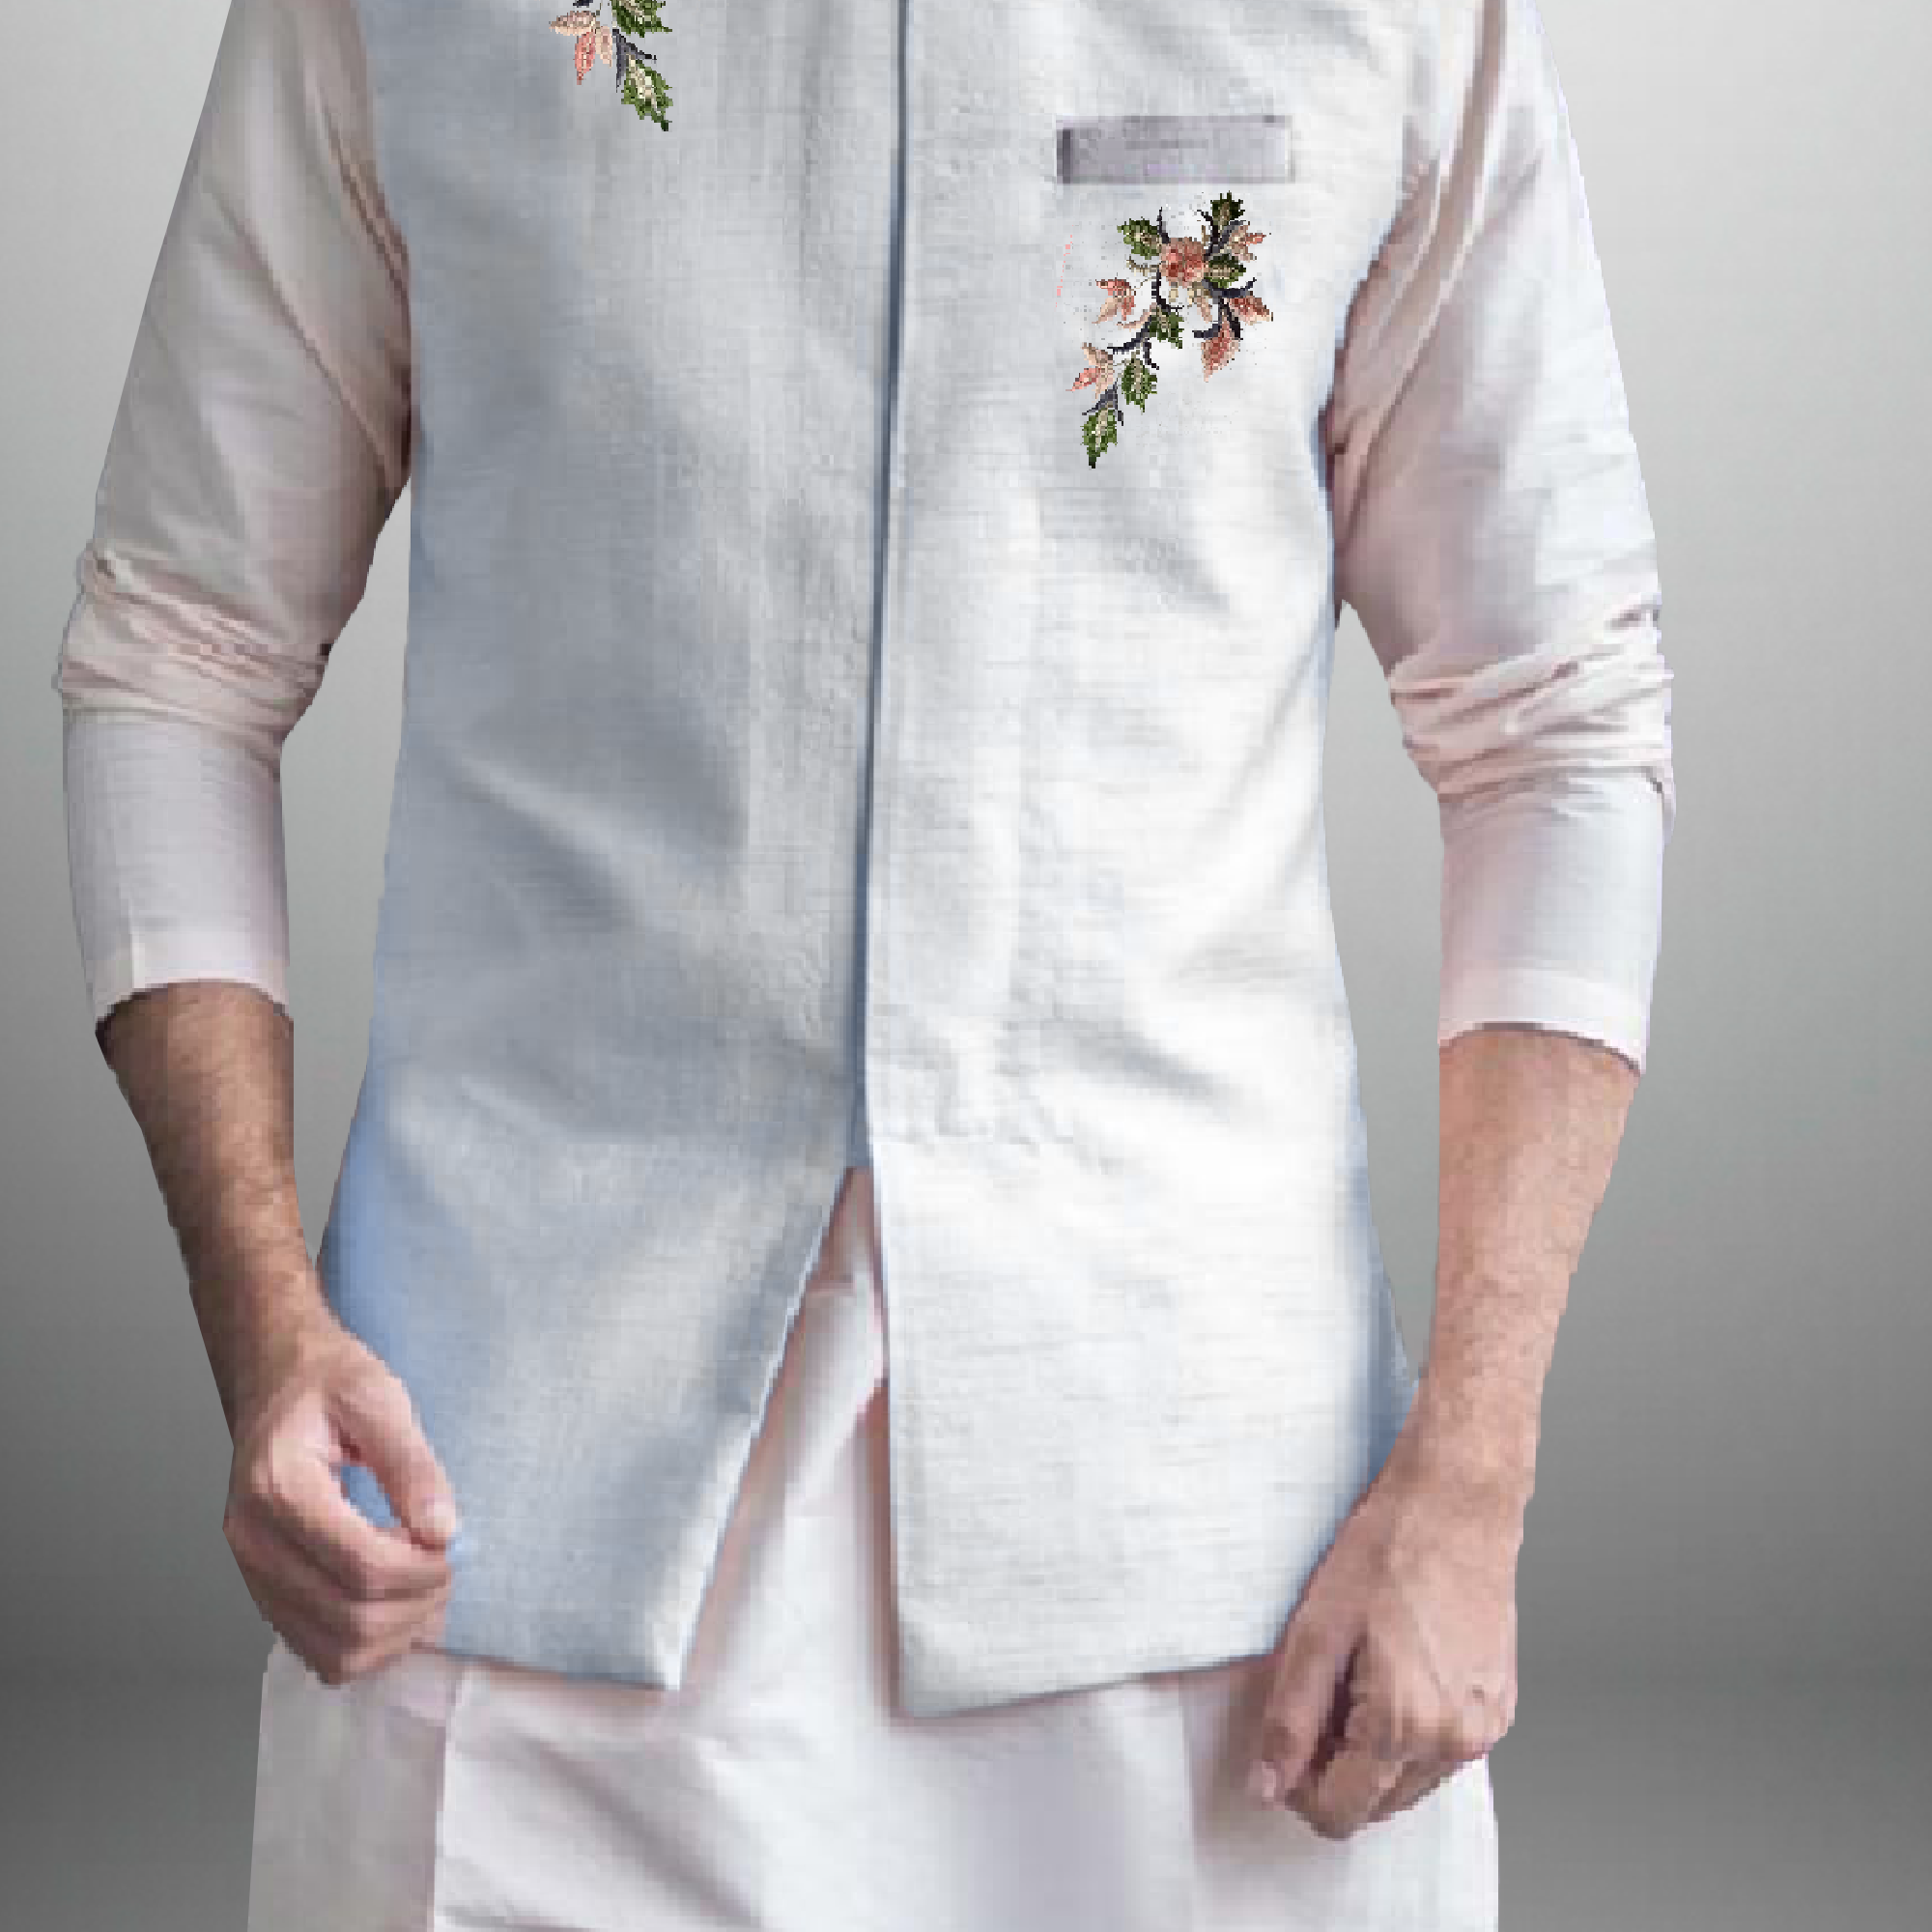 Men's Light Blue waistcoat with floral embroidery on front-RMWC001